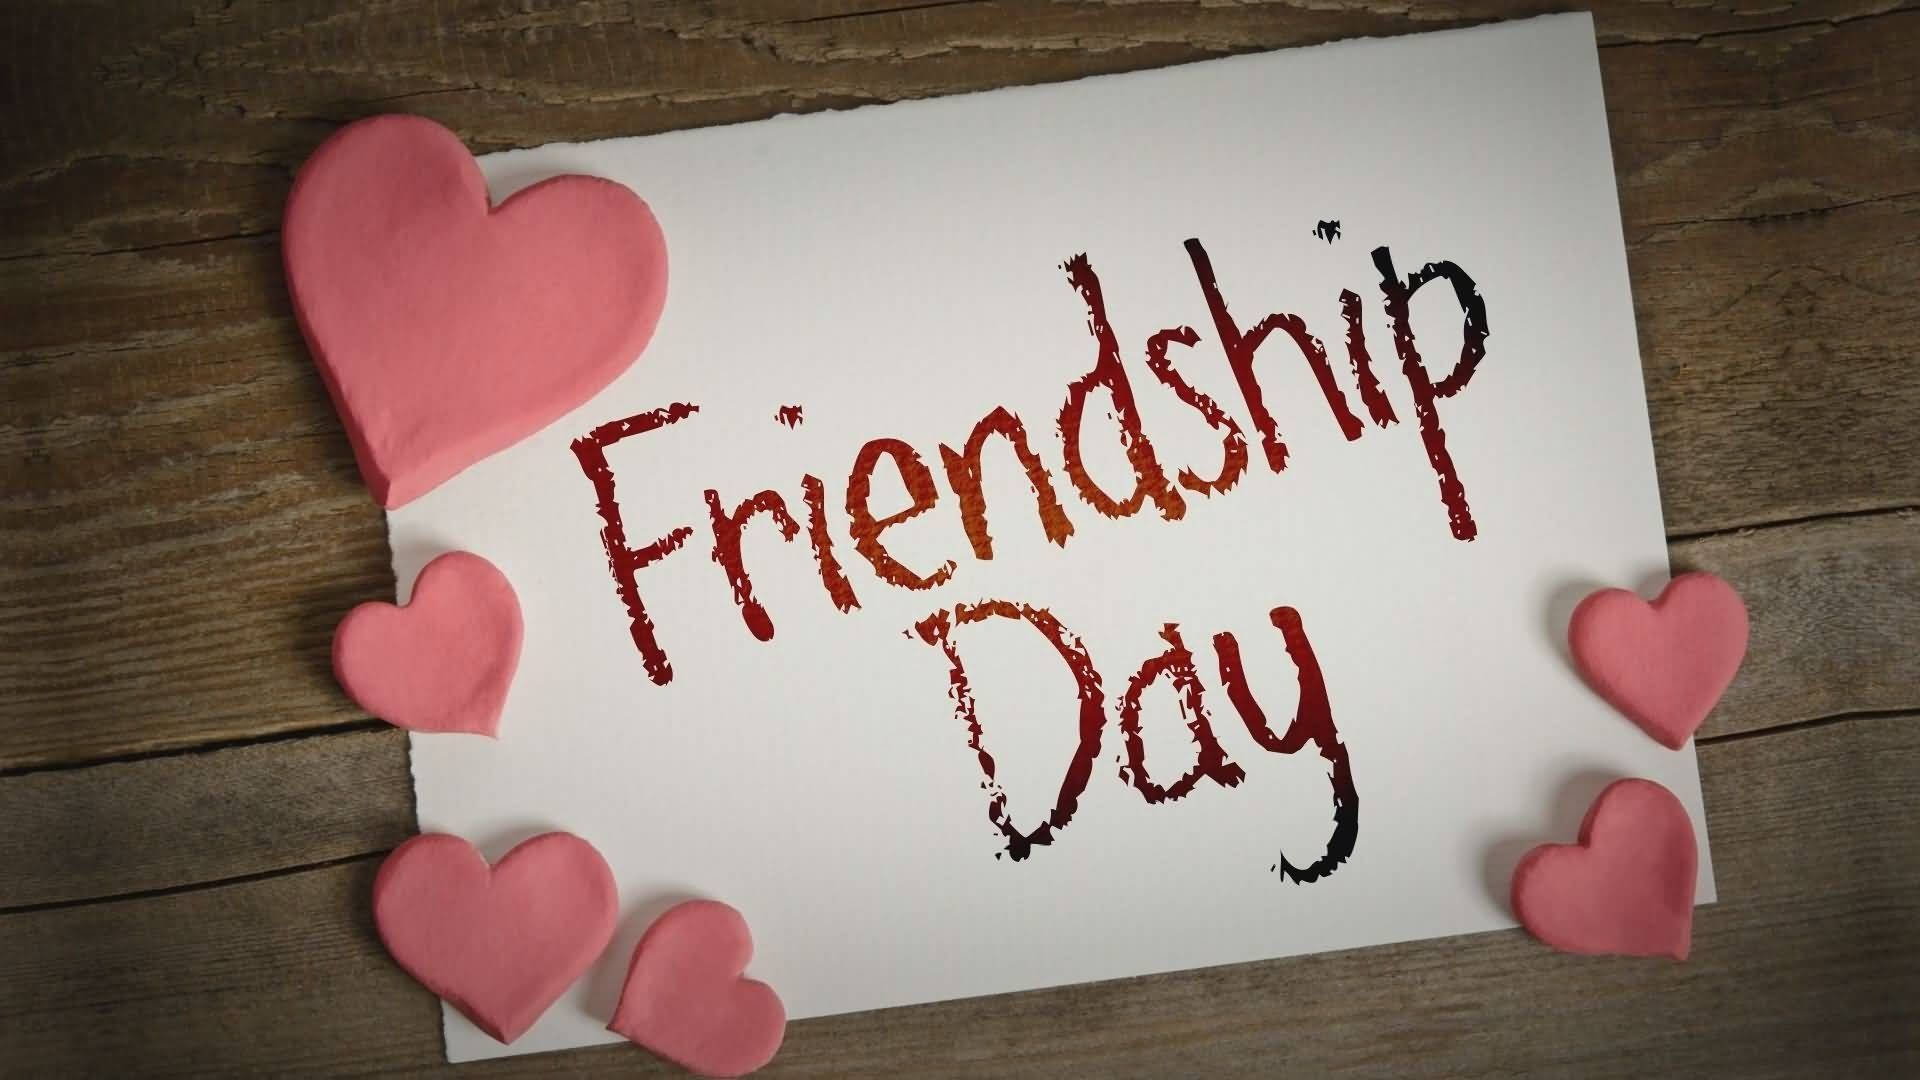 50 Beautiful Friendship Day Greetings Messages Quotes and Wallpapers  4  August 2019